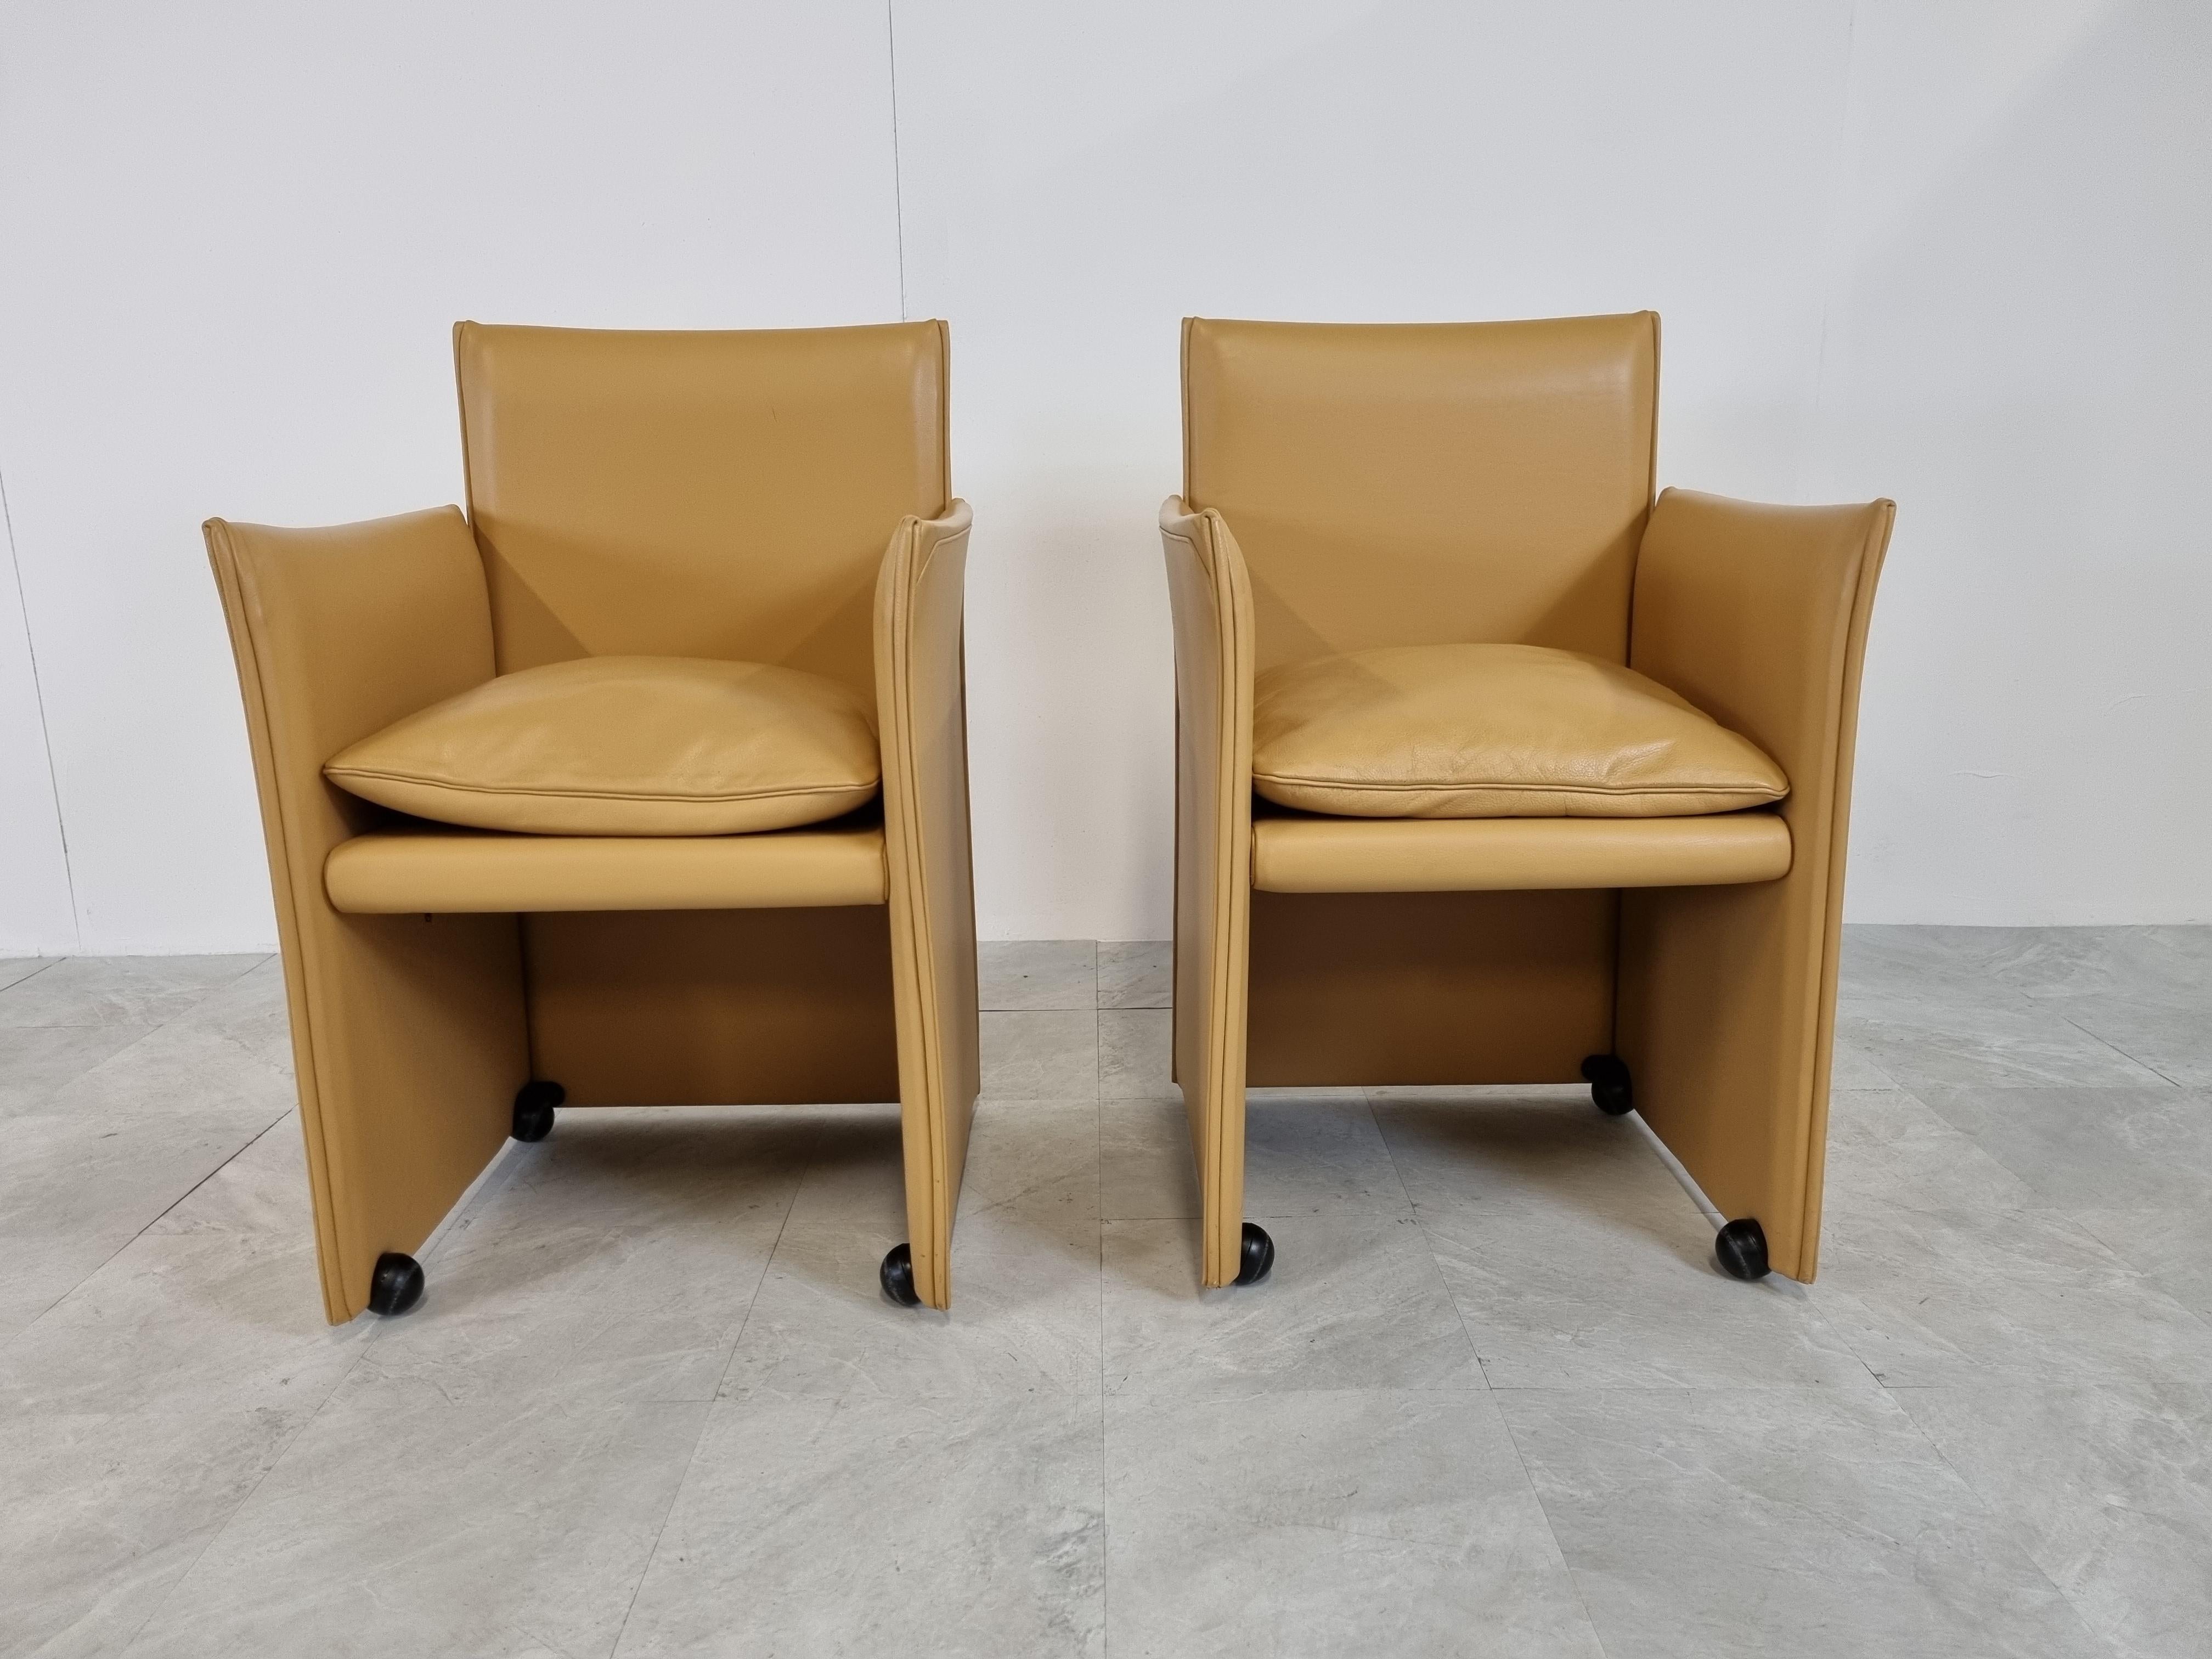 Pair of camel leather 401 break chairs designed by Mario Bellini and produced by Cassina.

The chairs are in perfect condition and are of a very high quality, as expected from Cassina furniture.

The chairs have 4 casters which make them glide